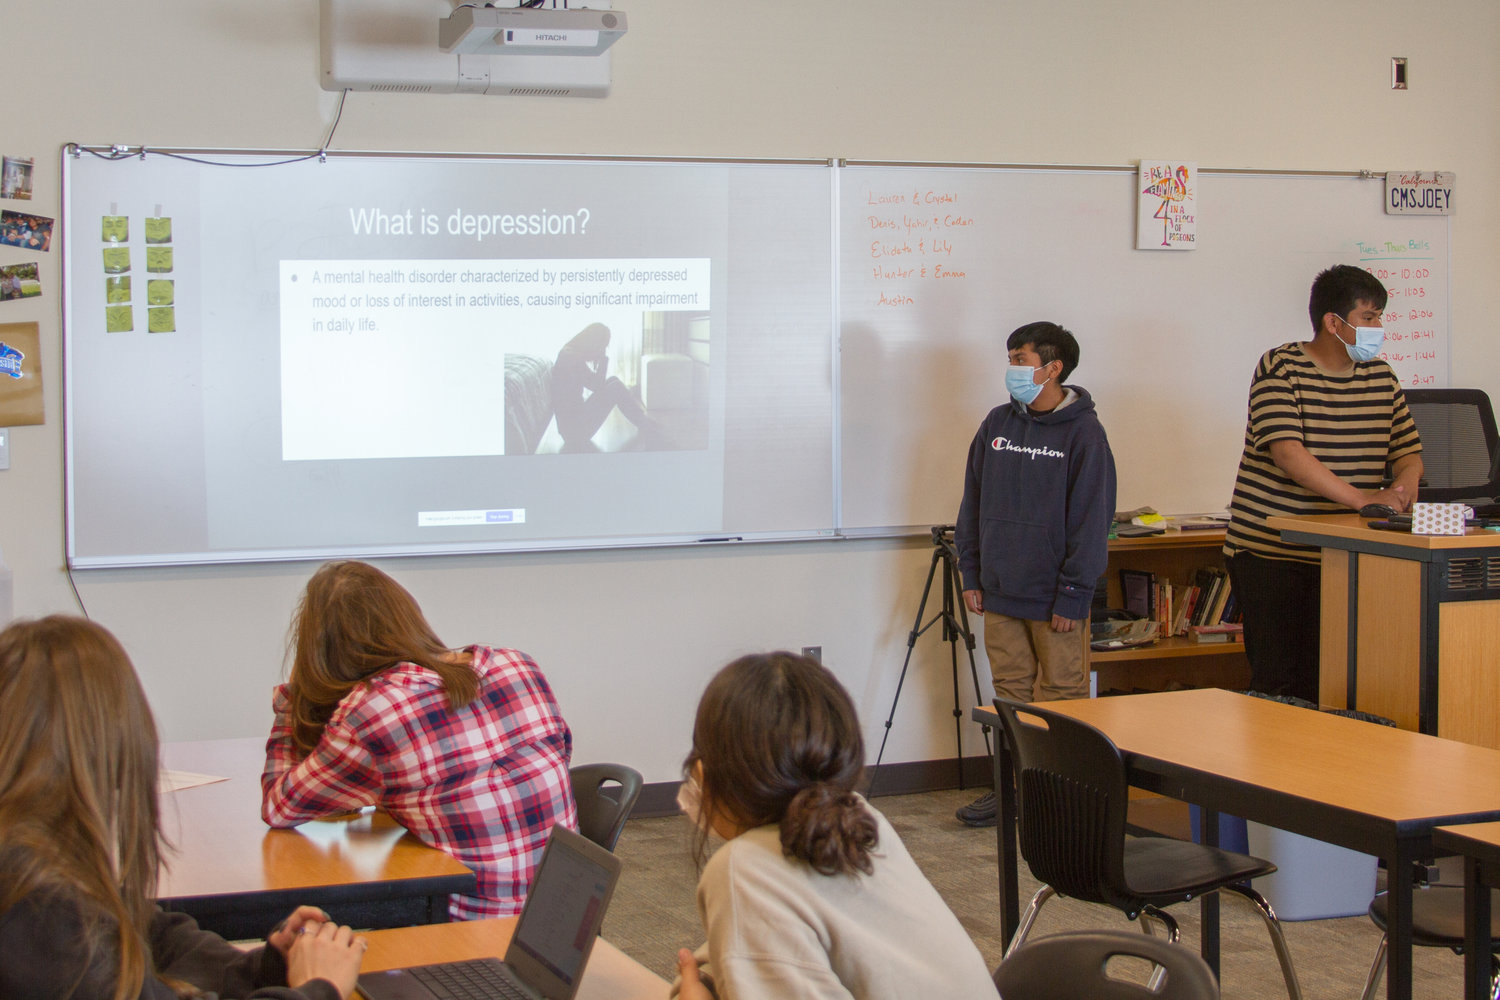 Students gave presentations on teen depression as well as suggestions for how to address it.